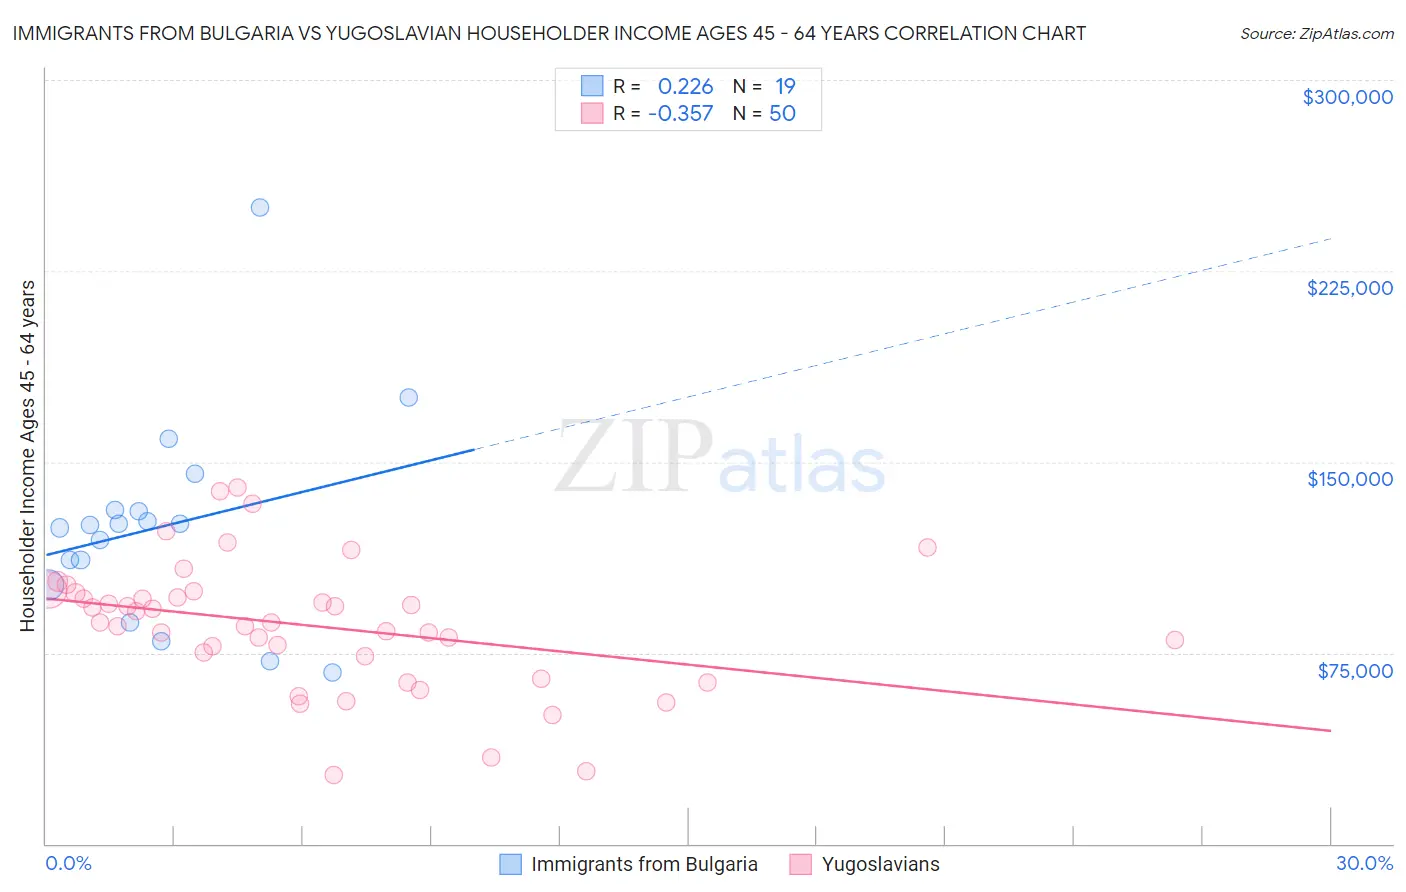 Immigrants from Bulgaria vs Yugoslavian Householder Income Ages 45 - 64 years